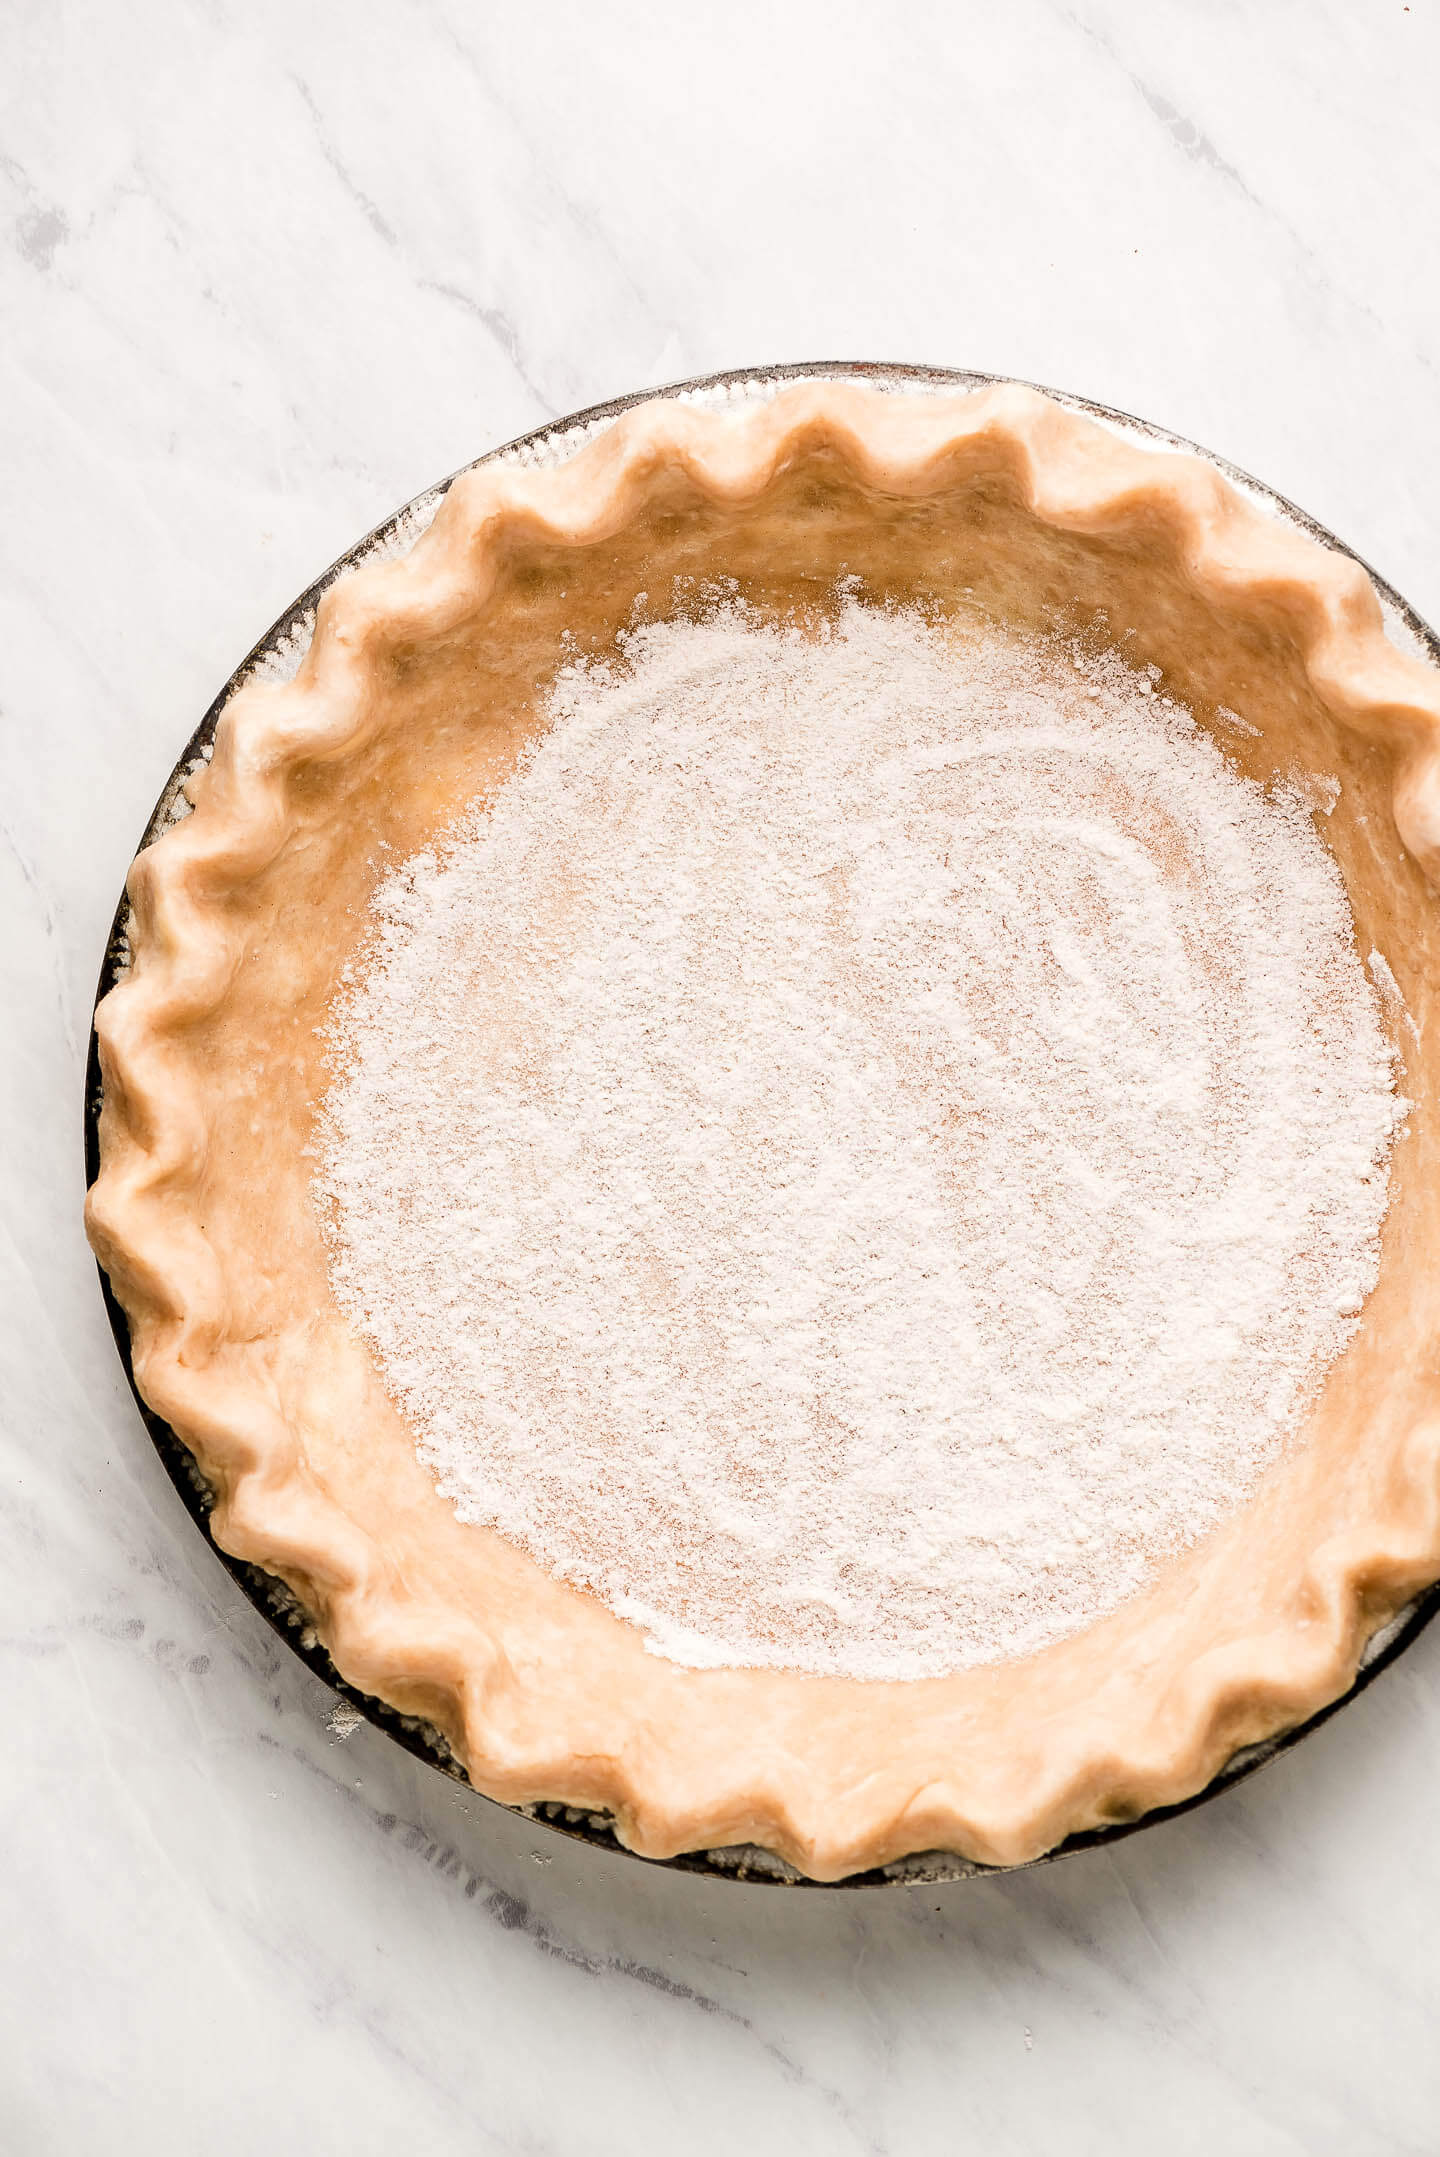 Uncooked pie shell with fluted edges and sugar/flour sprinkled on the bottom.